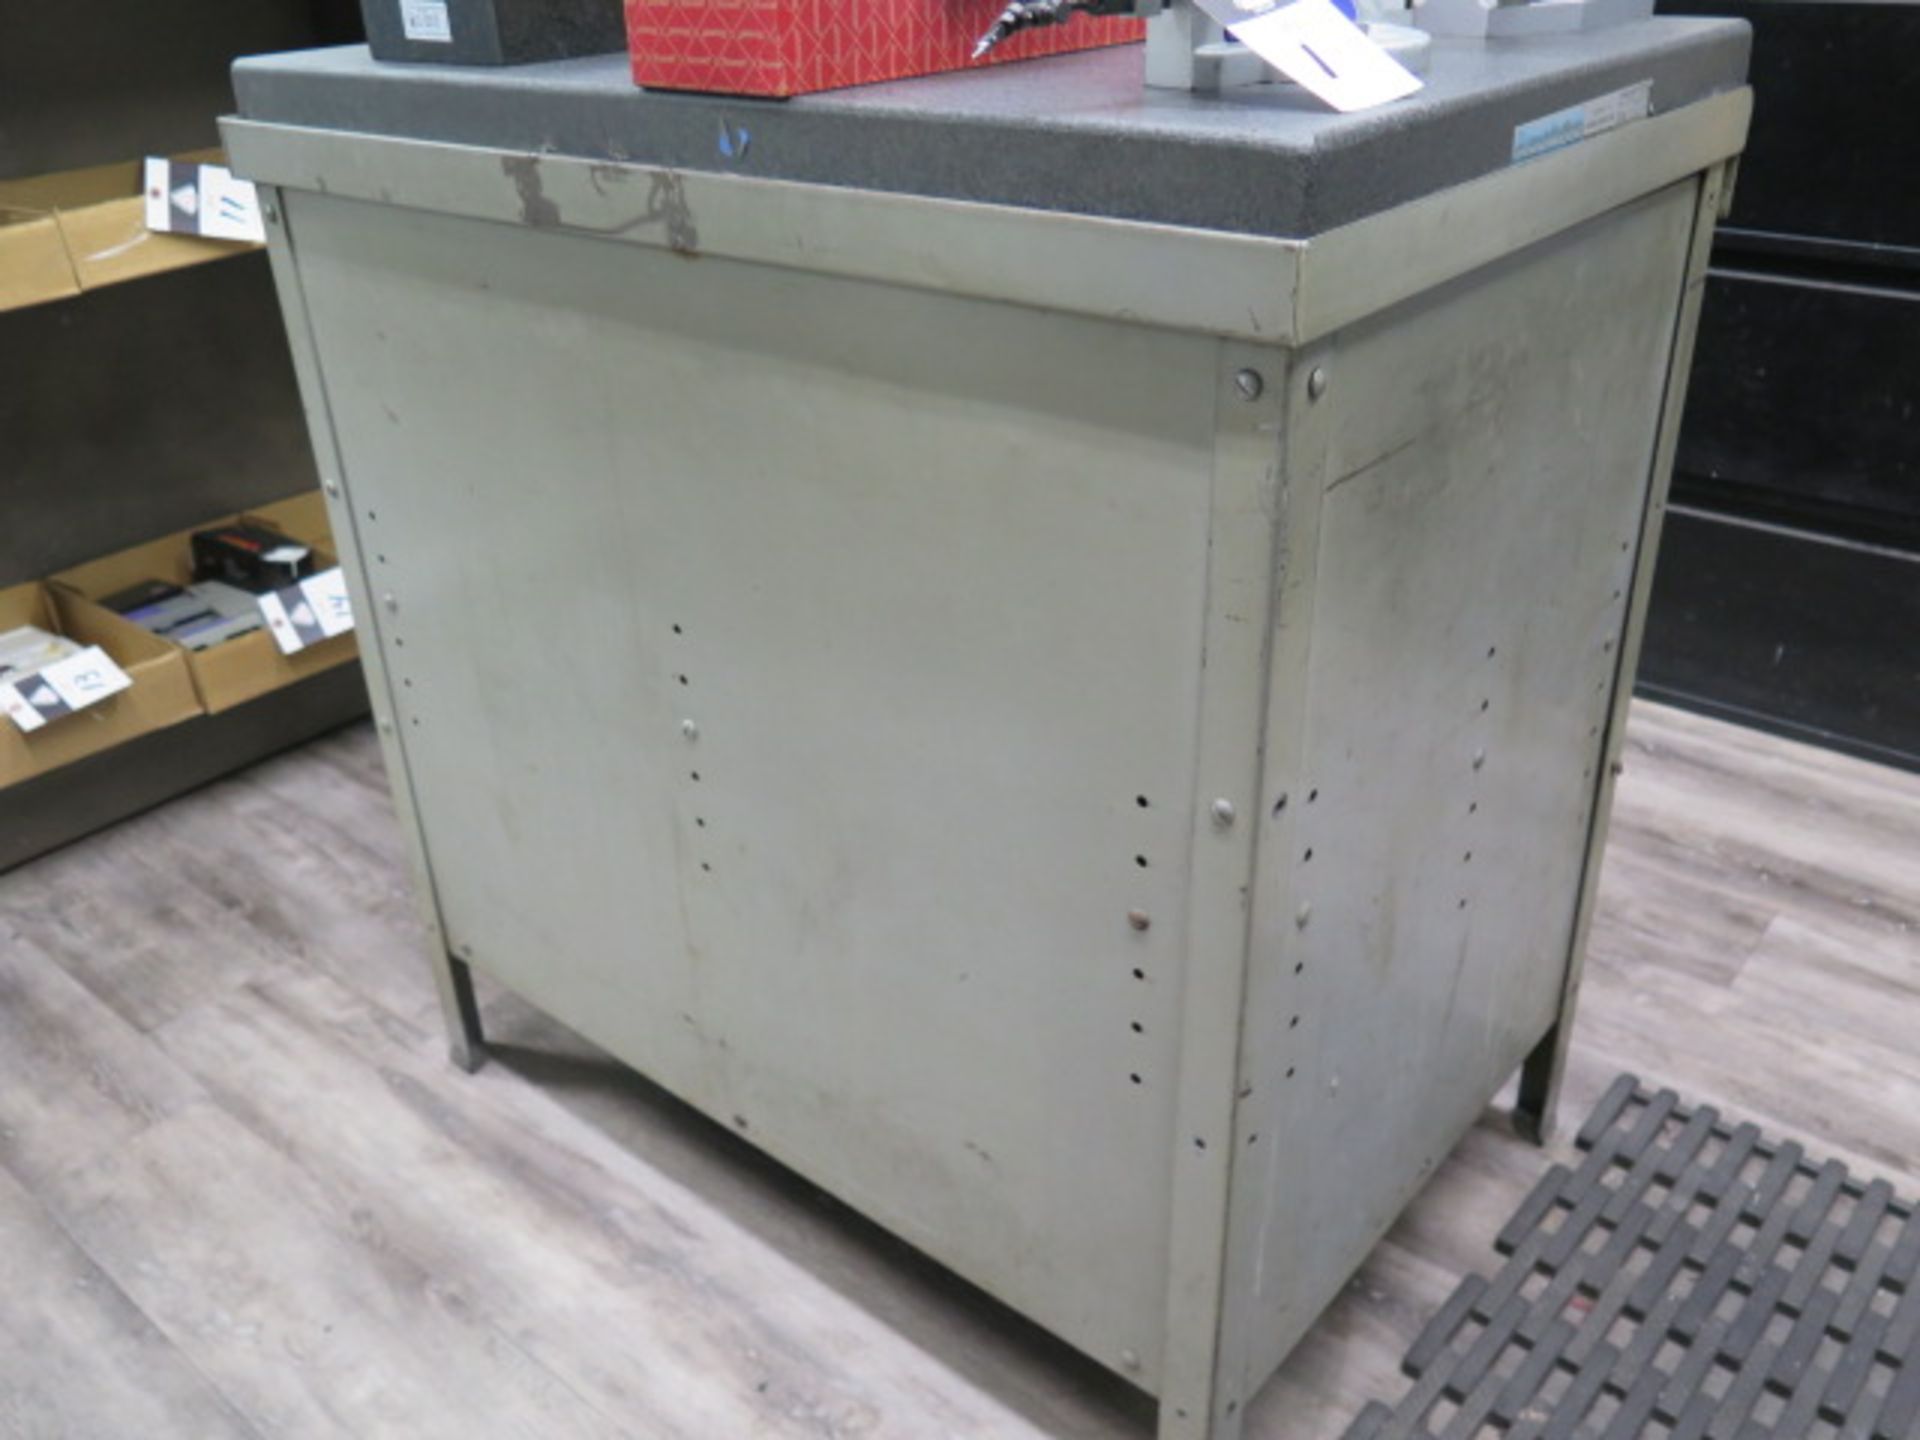 24” x 36” x 3” Granite Surface Plate w/ Cabinet Base (SOLD AS-IS - NO WARRANTY) - Image 3 of 5